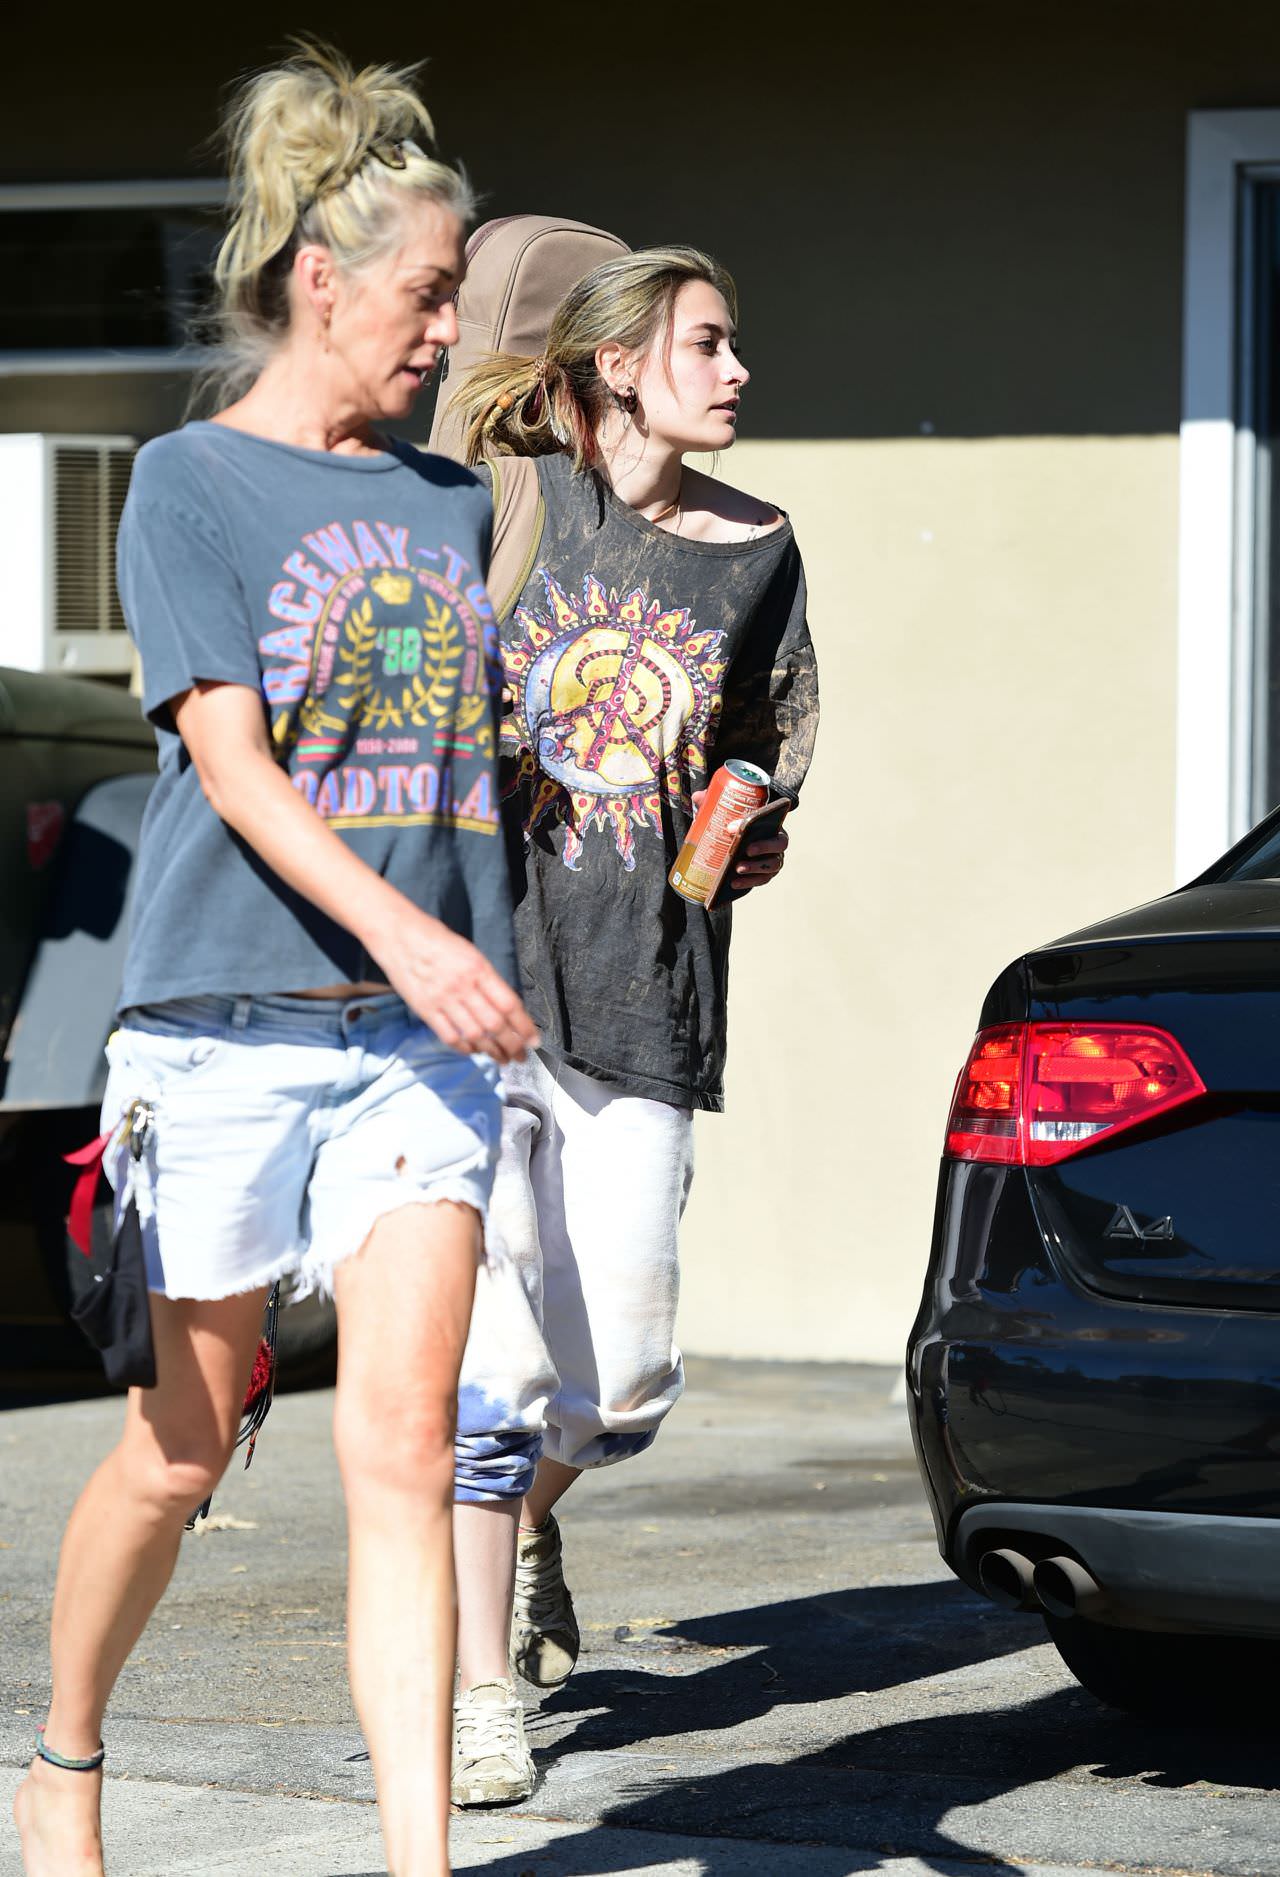 paris jackson in a peace sign t shirt as she smokes with friends 1